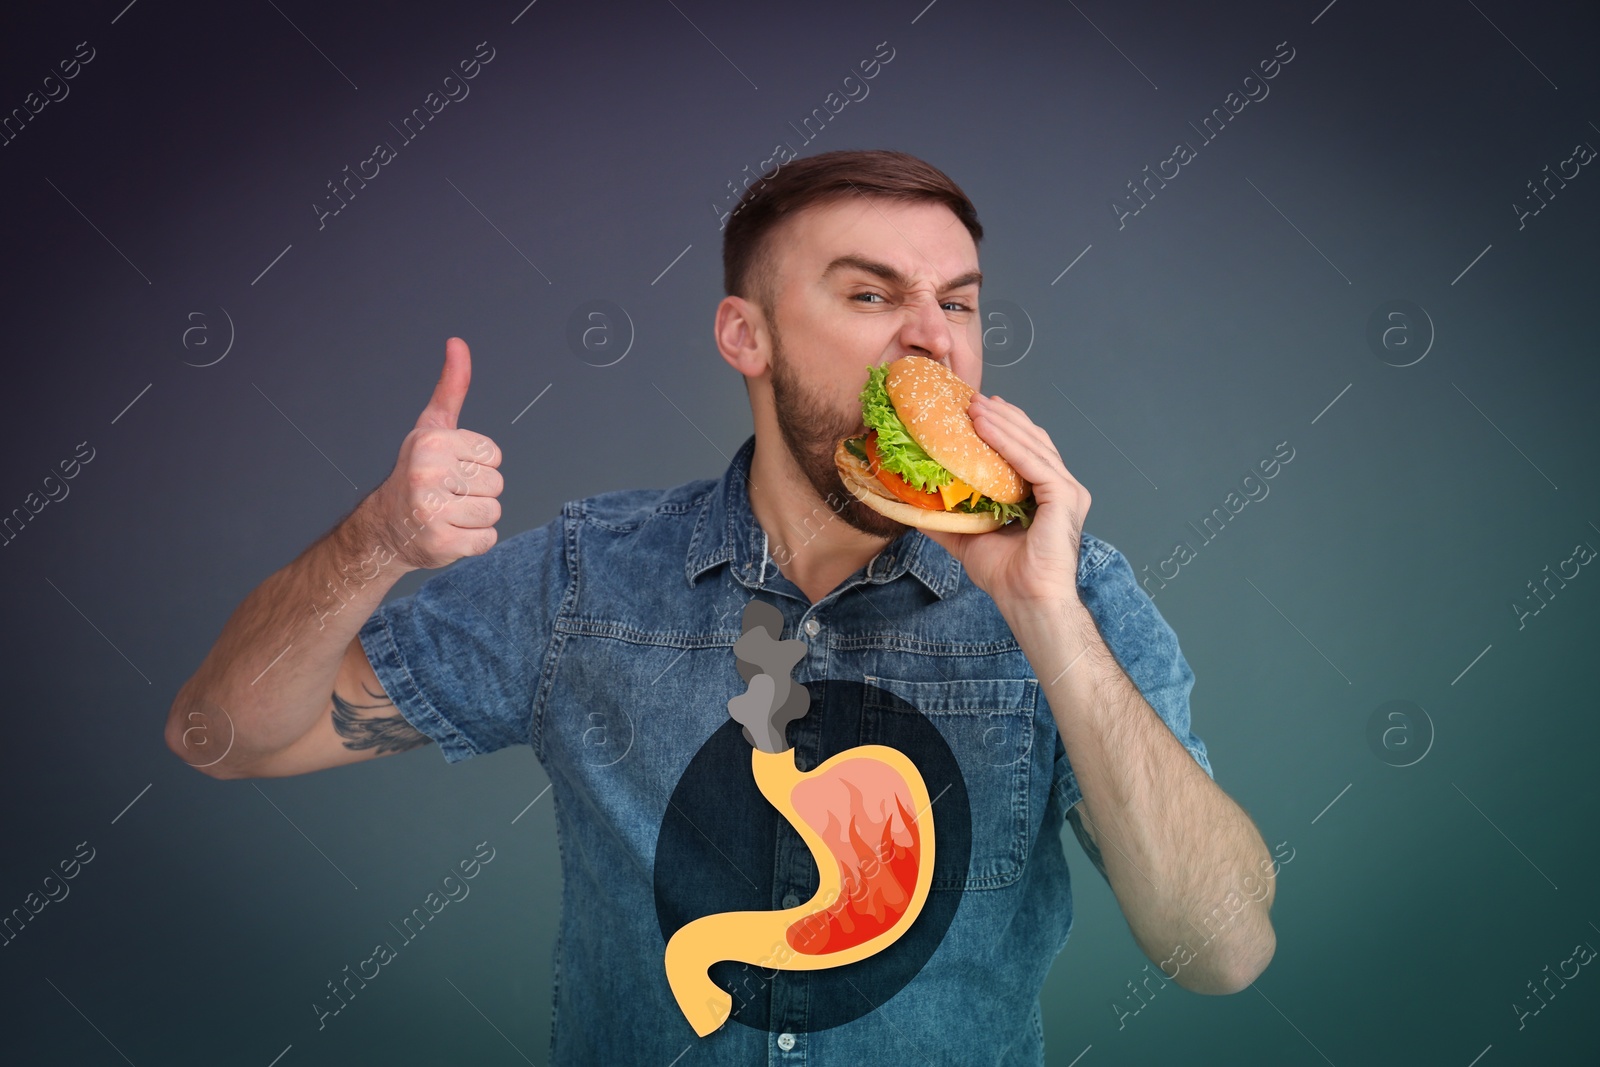 Image of Improper nutrition can lead to heartburn or other gastrointestinal problems. Happy man eating burger on dark background. Illustration of stomach with fire and smoke as acid indigestion